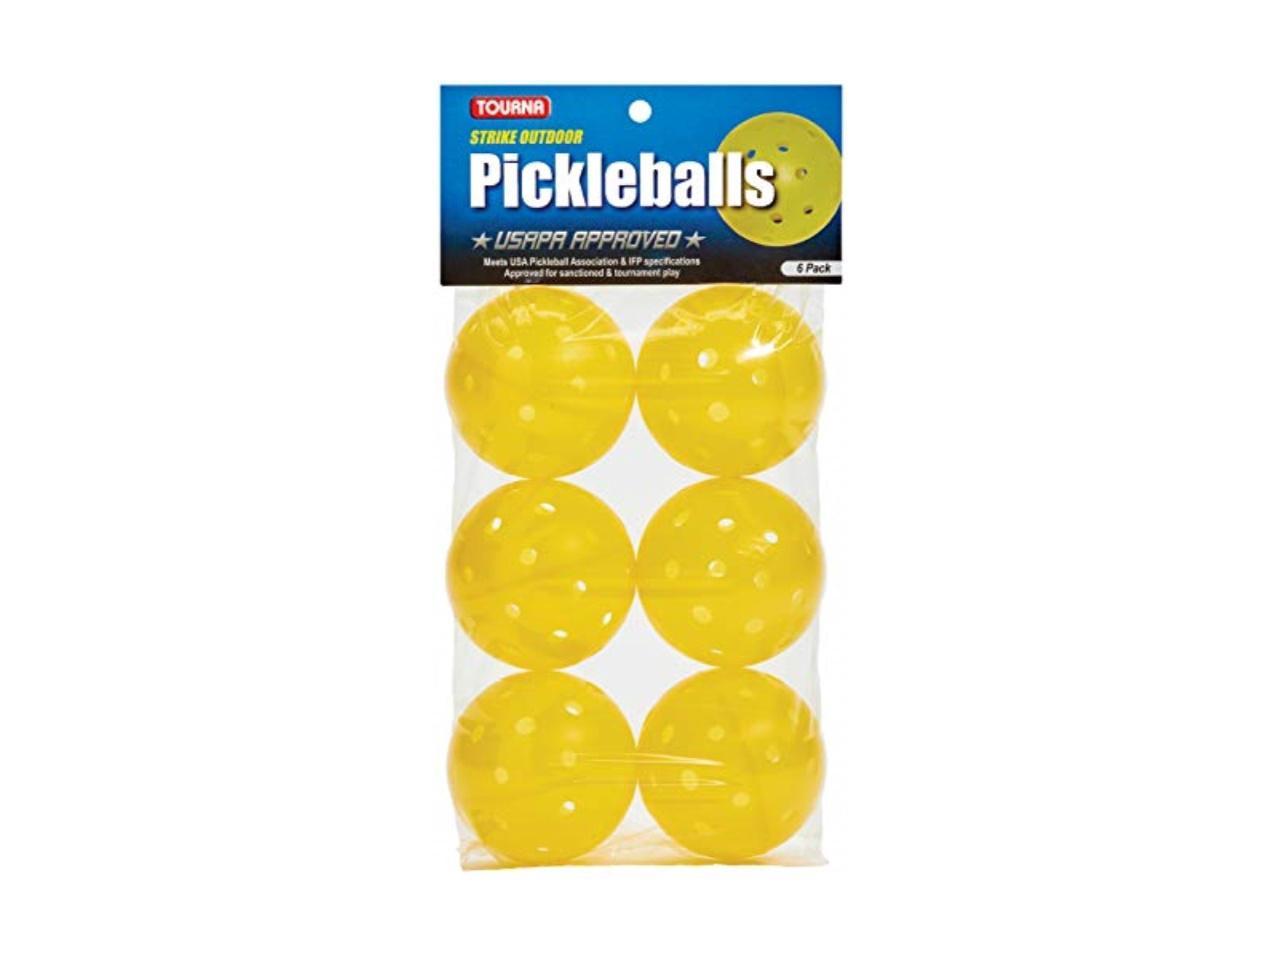 TOURNA Strike Outdoor Pickleballs (6 Pack) - USAPA Approved